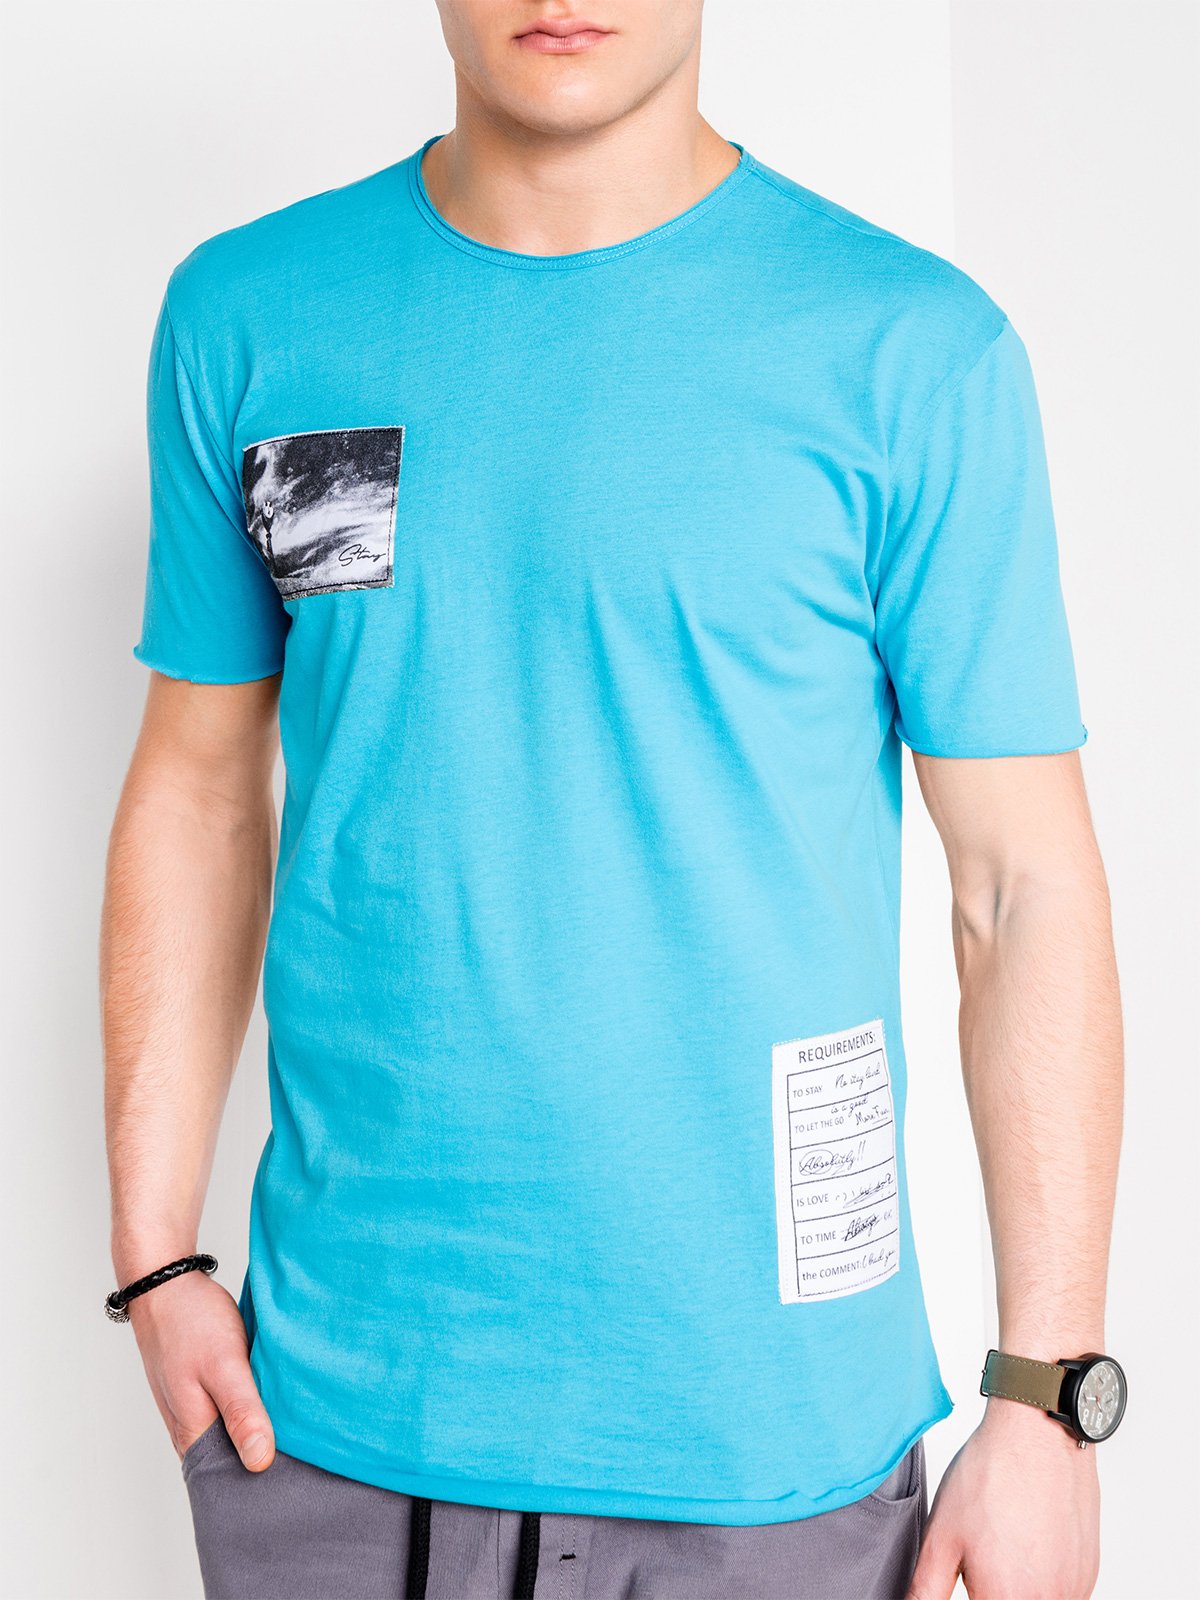 Men's printed t-shirt S983 - turquoise | MODONE wholesale - Clothing